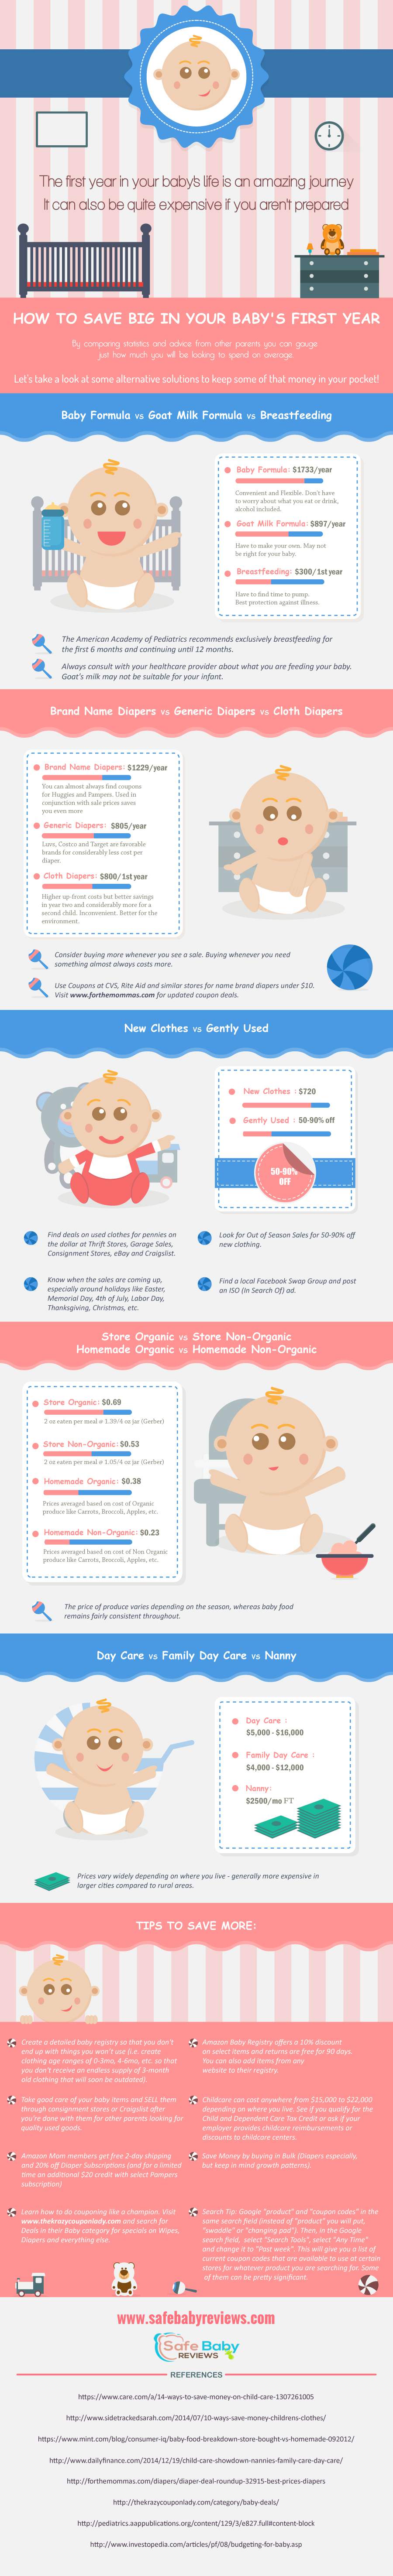 Infographic-How-To-Save-Baby